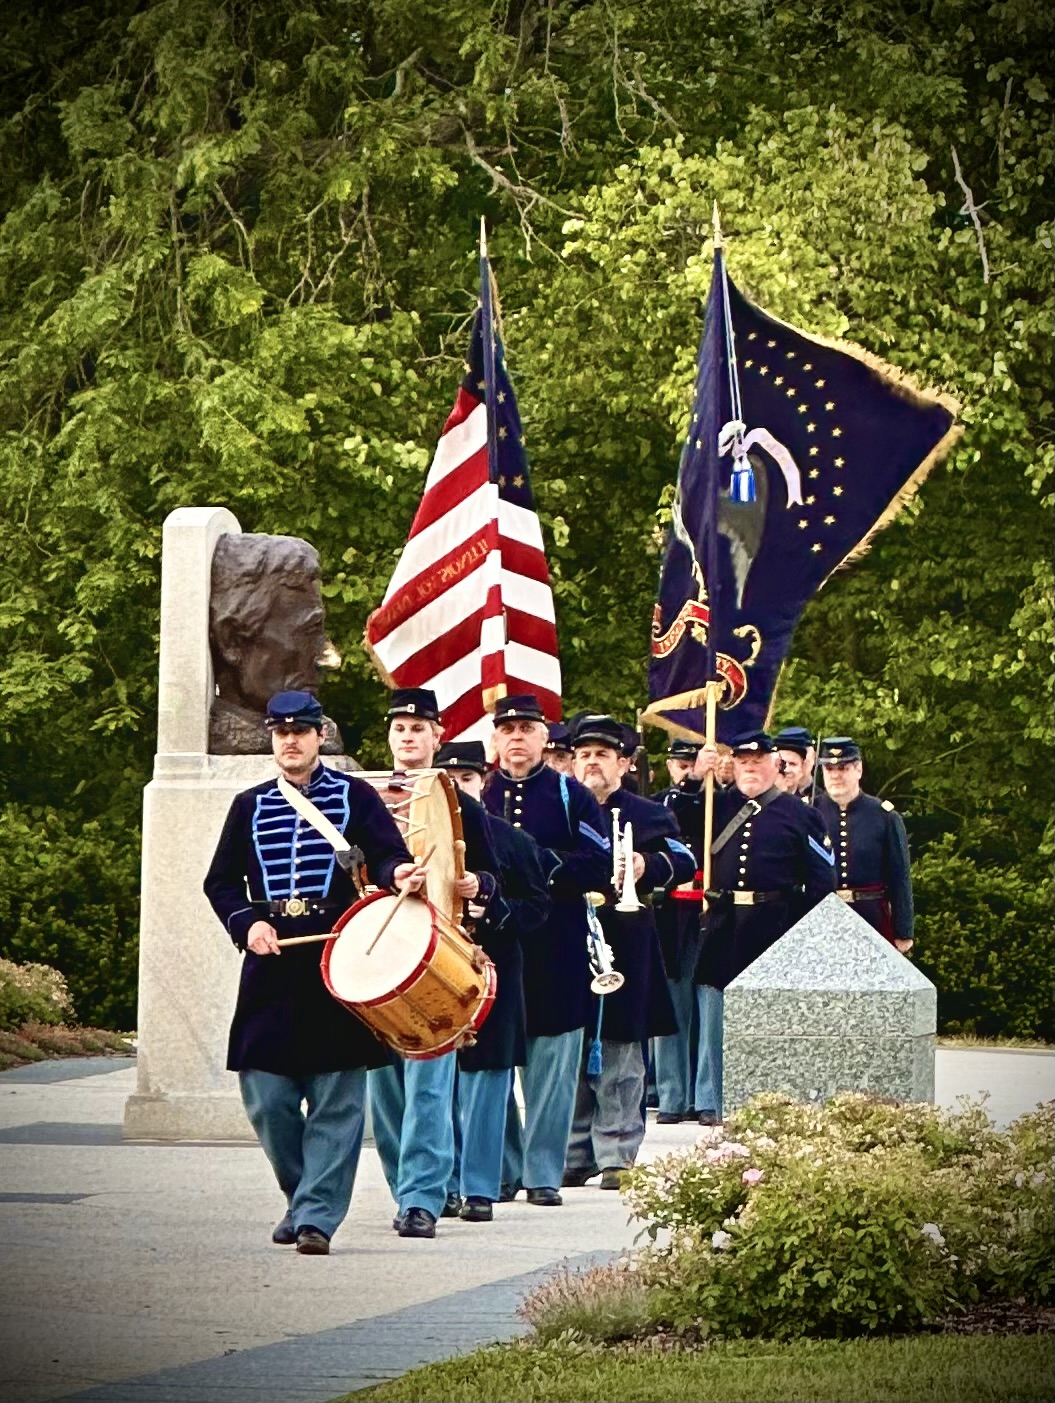 Civil War reenactors in uniform march in front of the Lincoln Tomb with a drum and flags